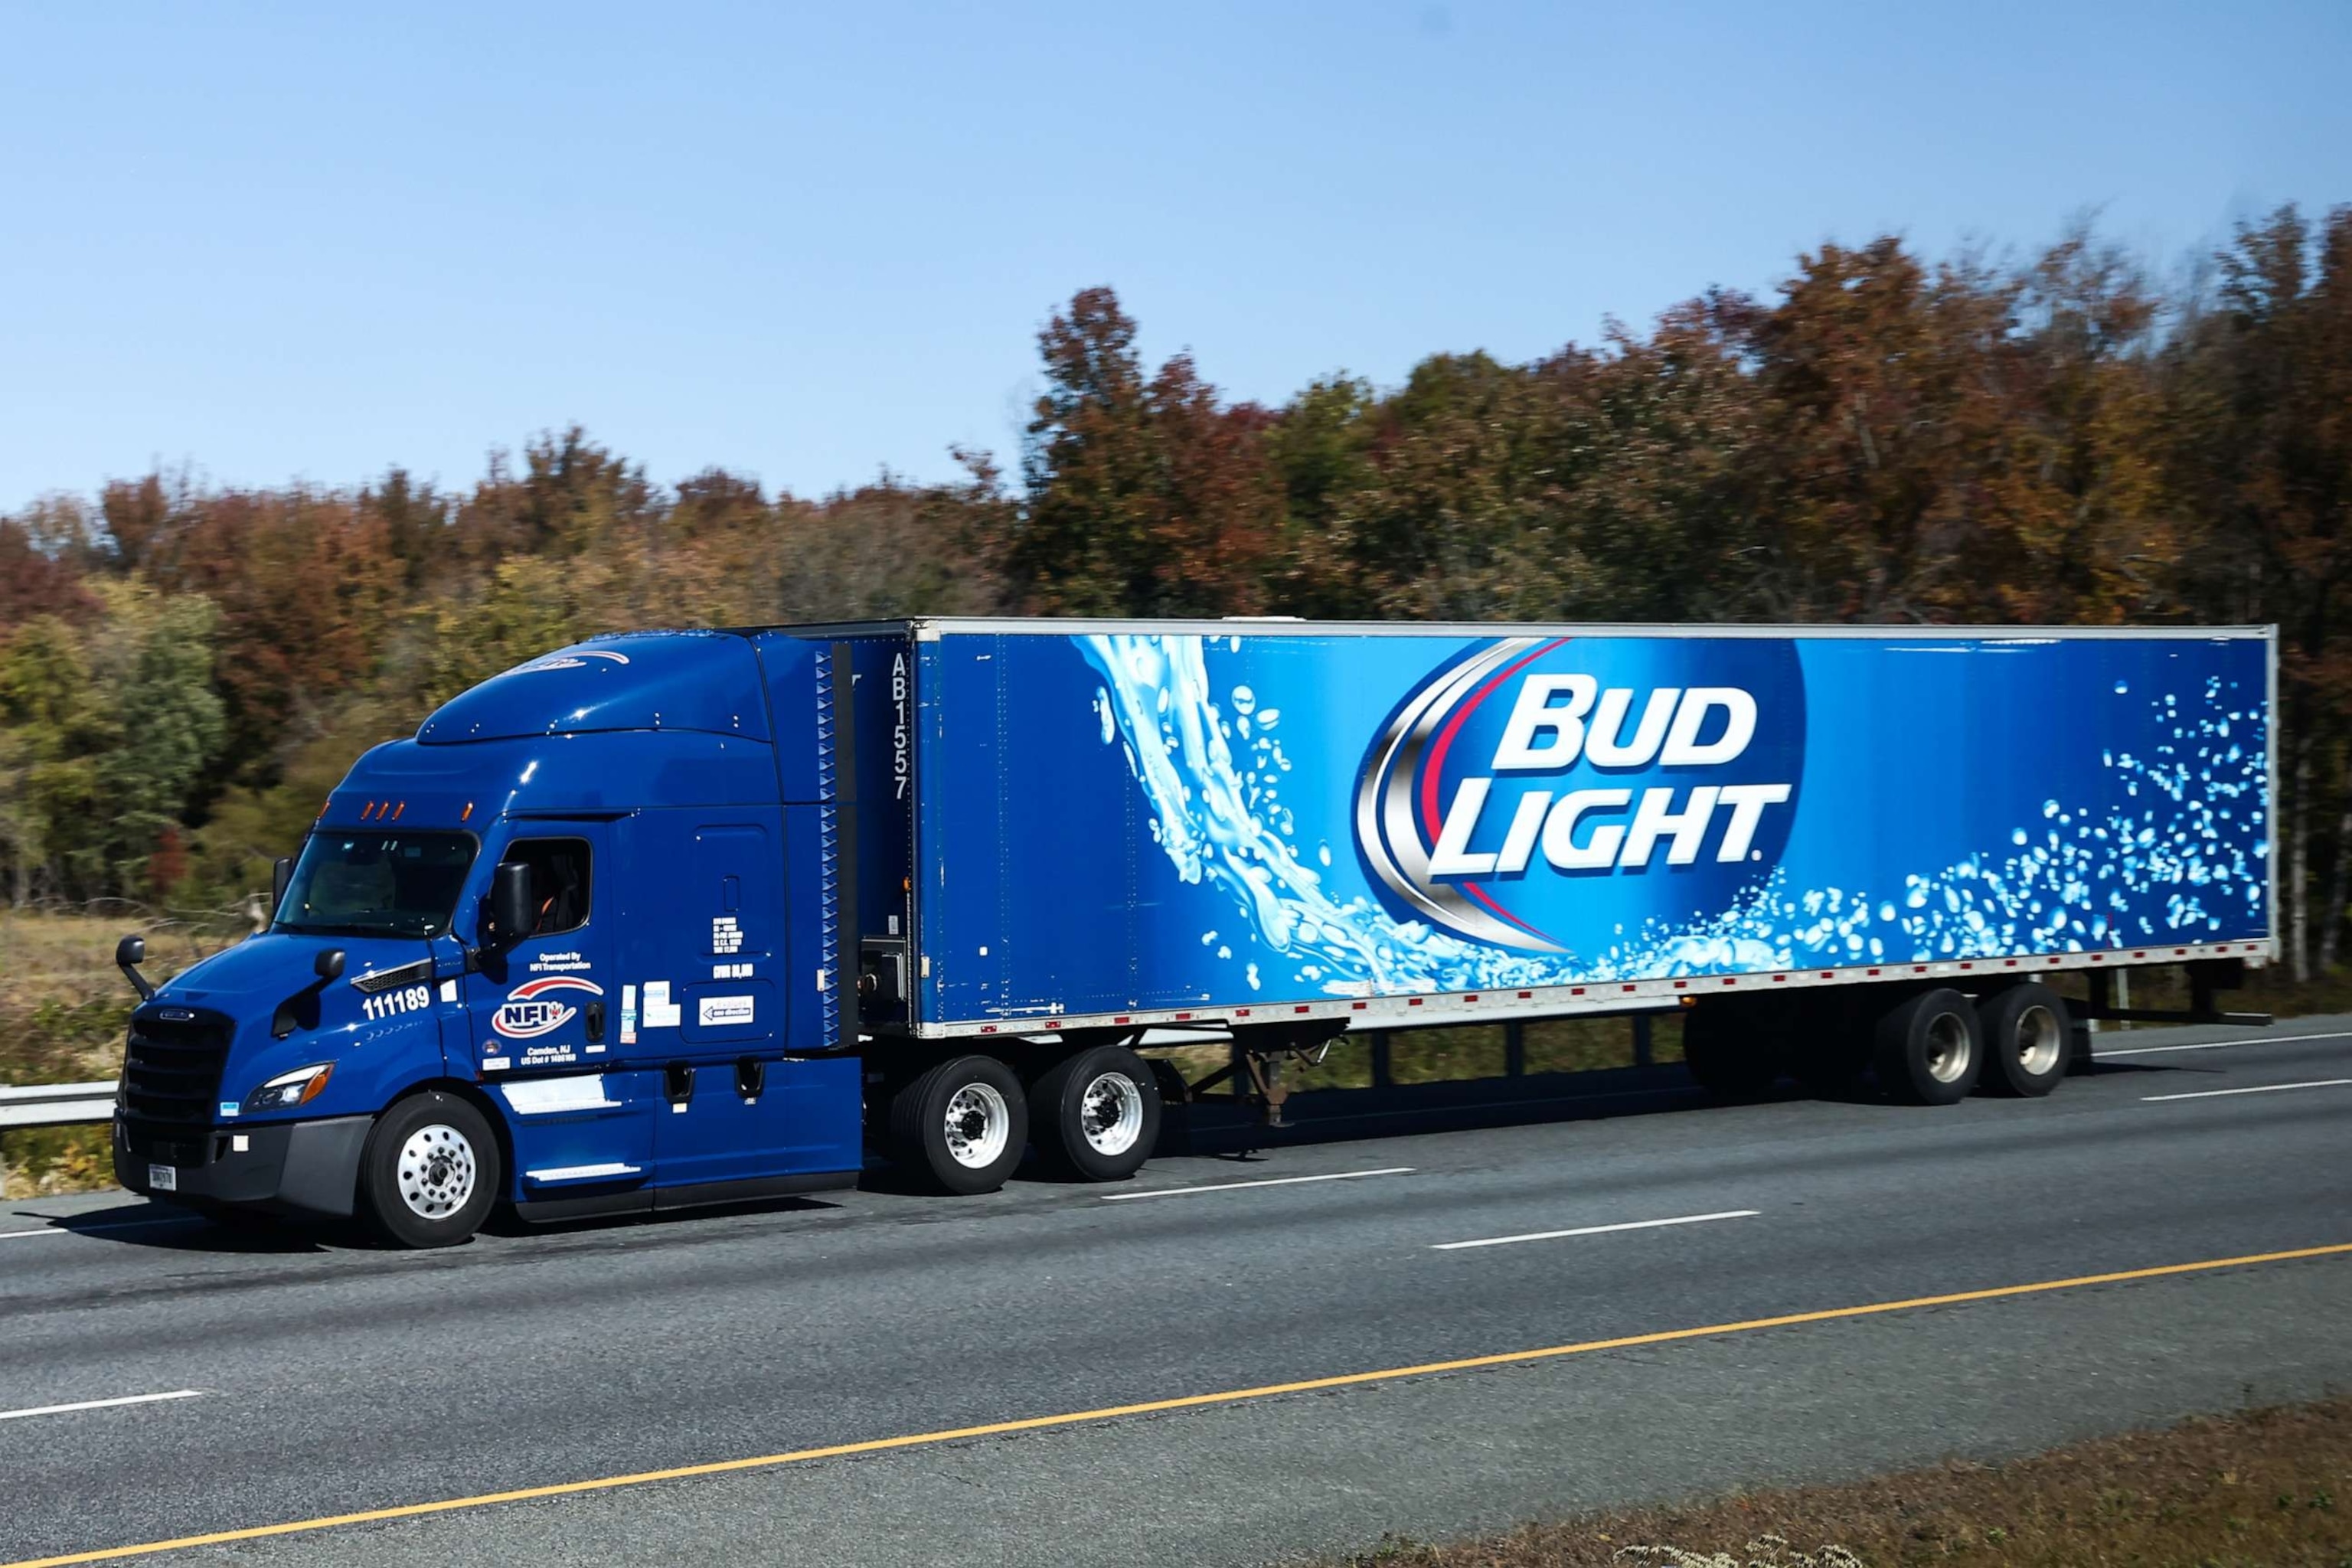 PHOTO: The Bud Light logo is seen on a truck semitrailer, Oct. 21, 2022, in Maryland.